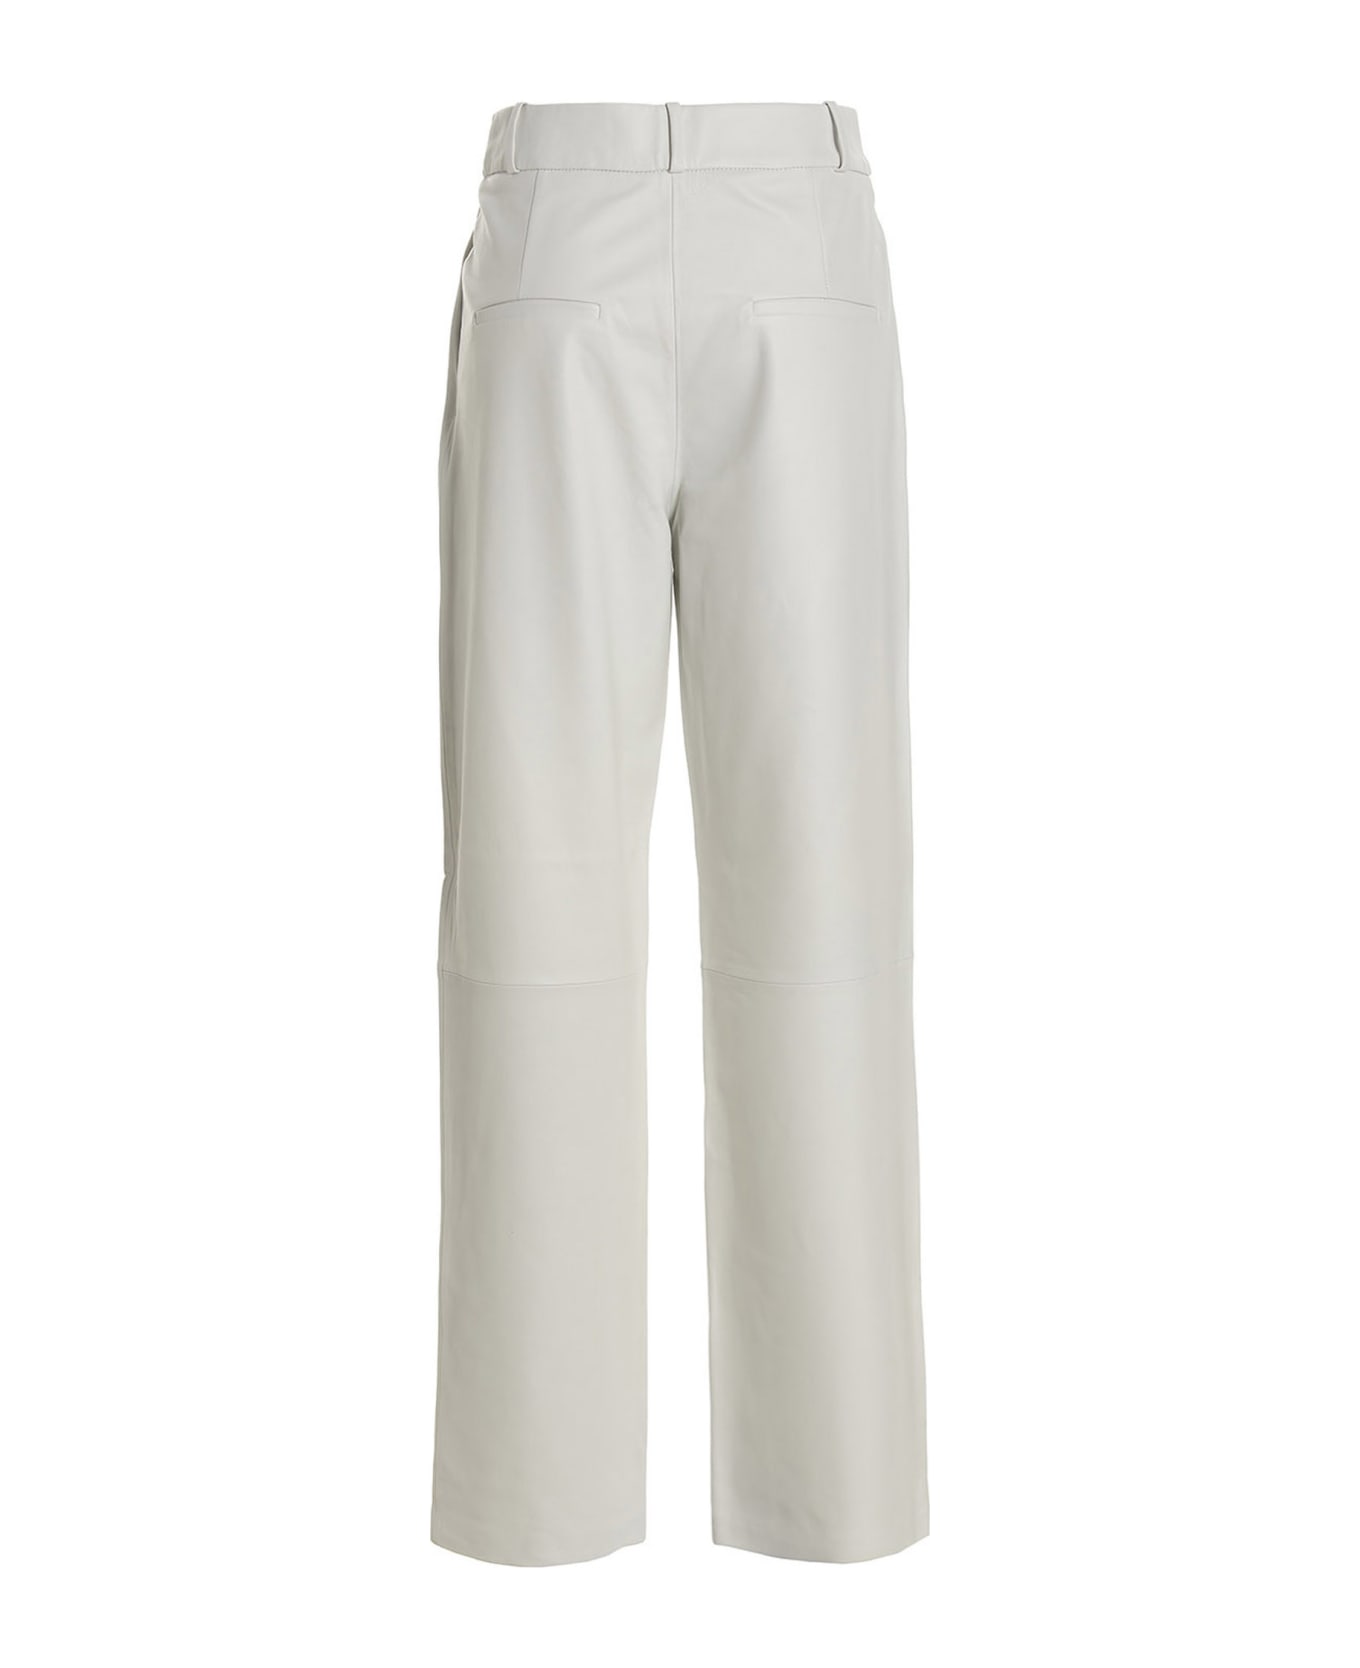 KASSL Editions Leather Pants - White